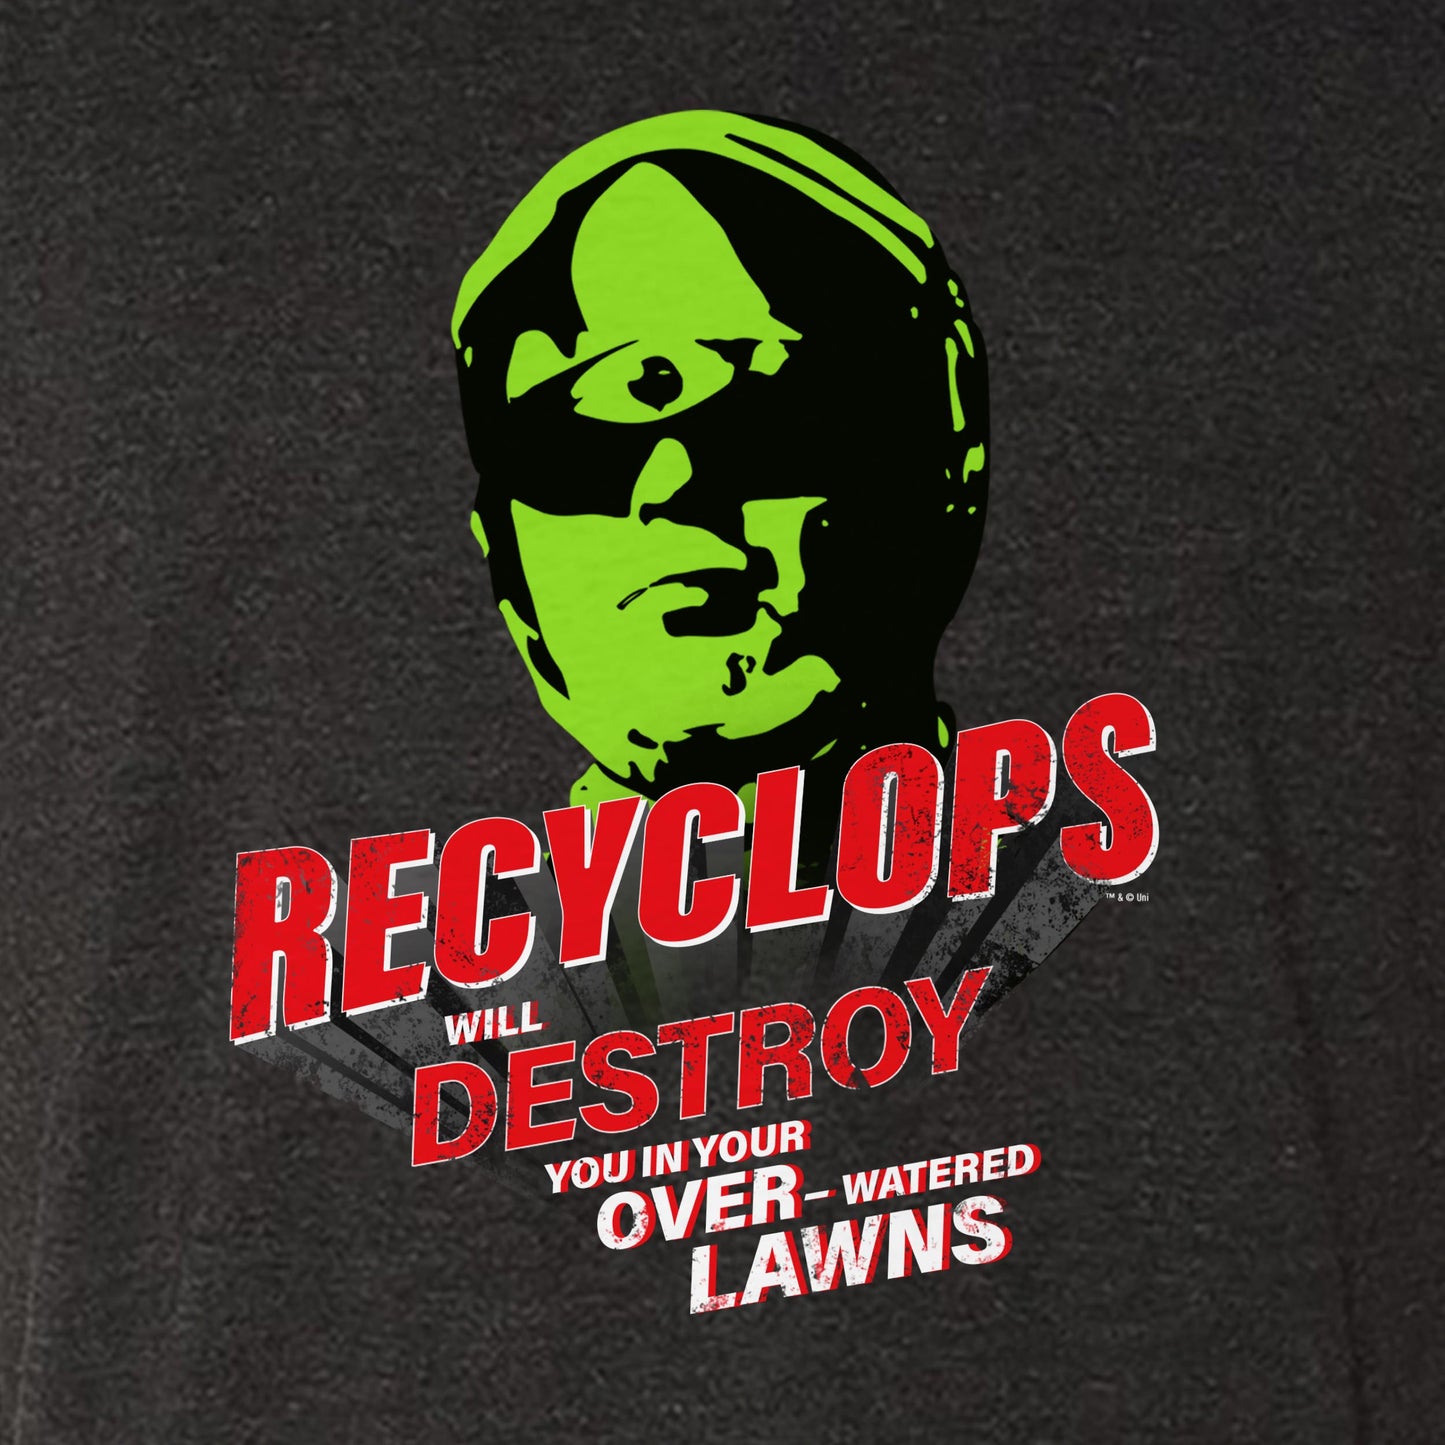 The Office Recyclops Over-Watered Lawns Men's Tri-Blend T-Shirt